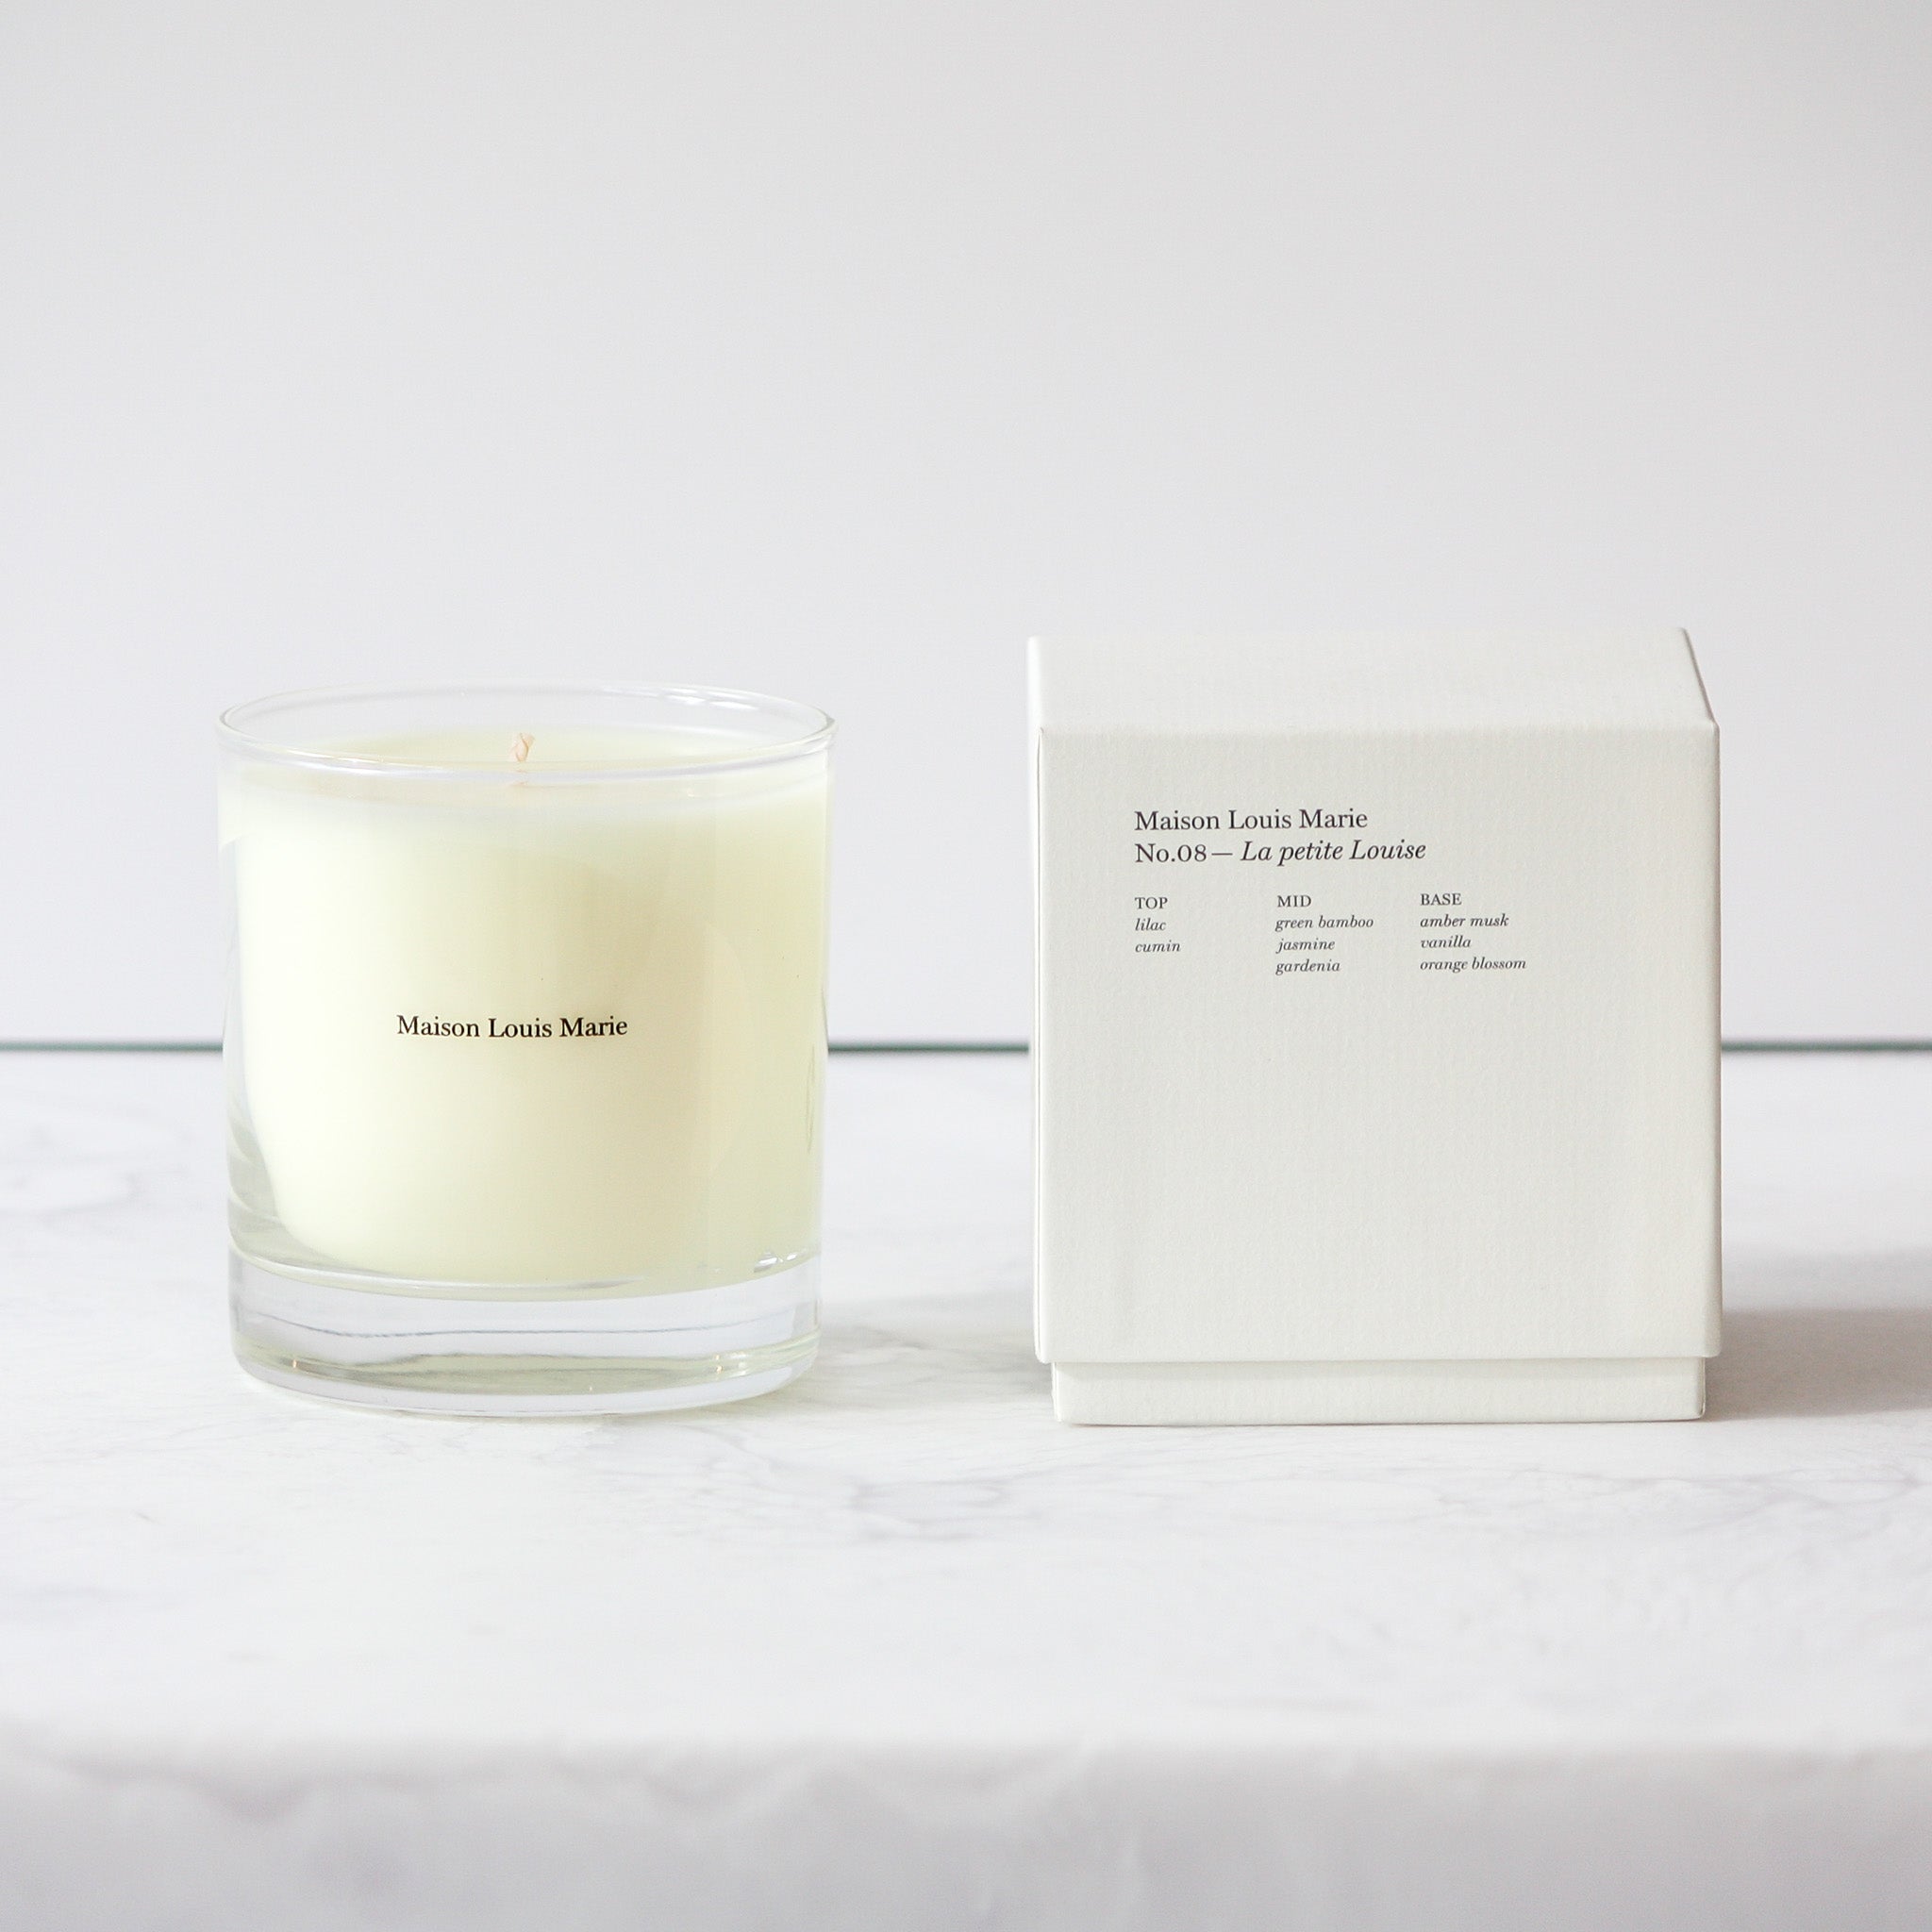 Maison Louis Marie Candles (several scents available)